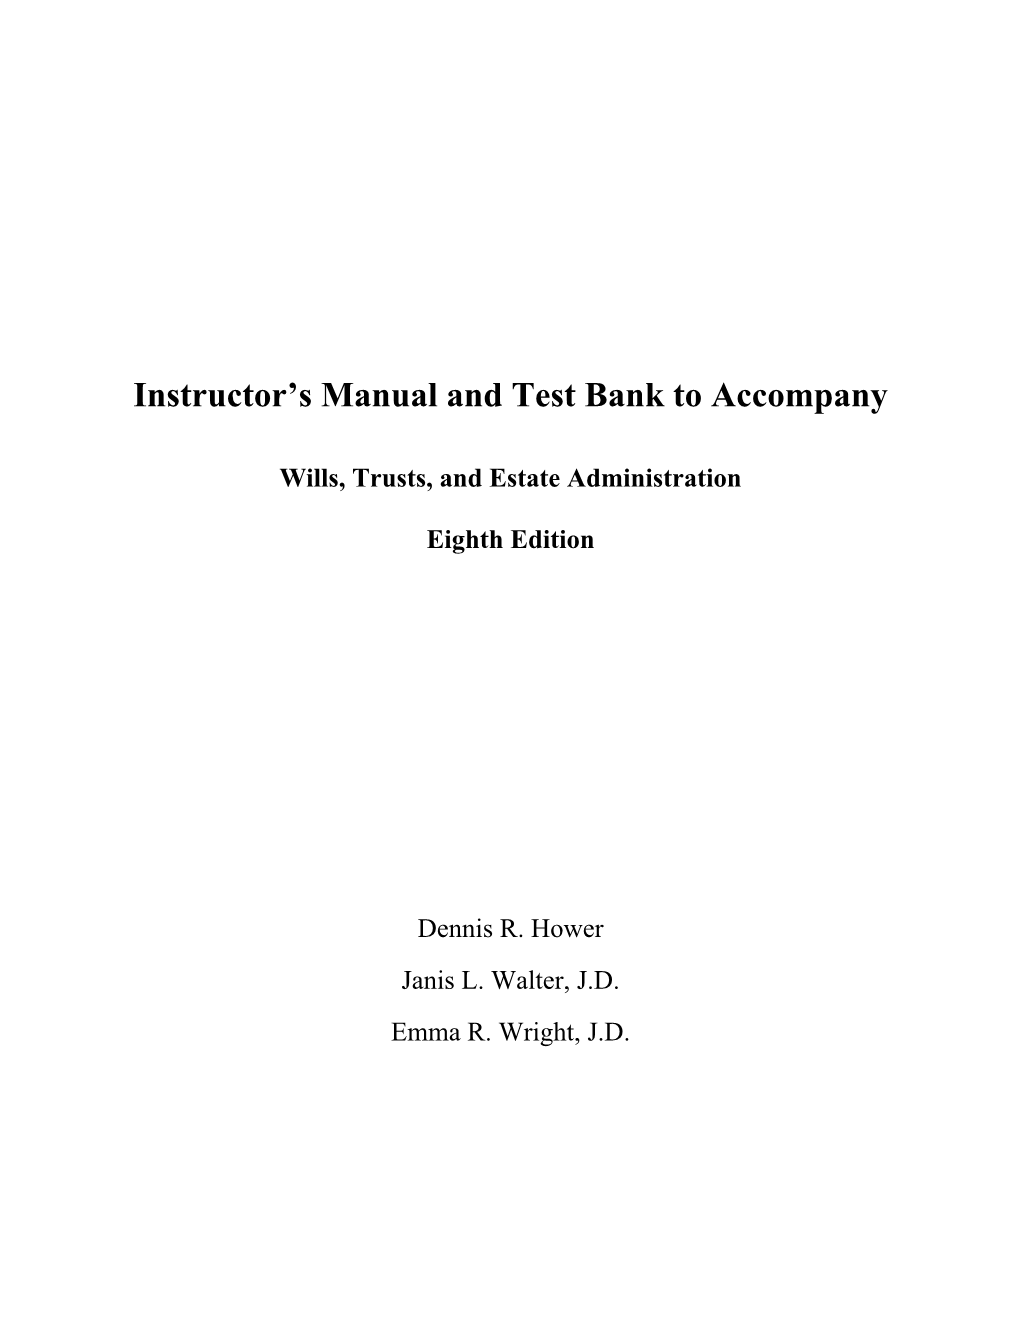 Instructor's Manual and Test Bank to Accompany